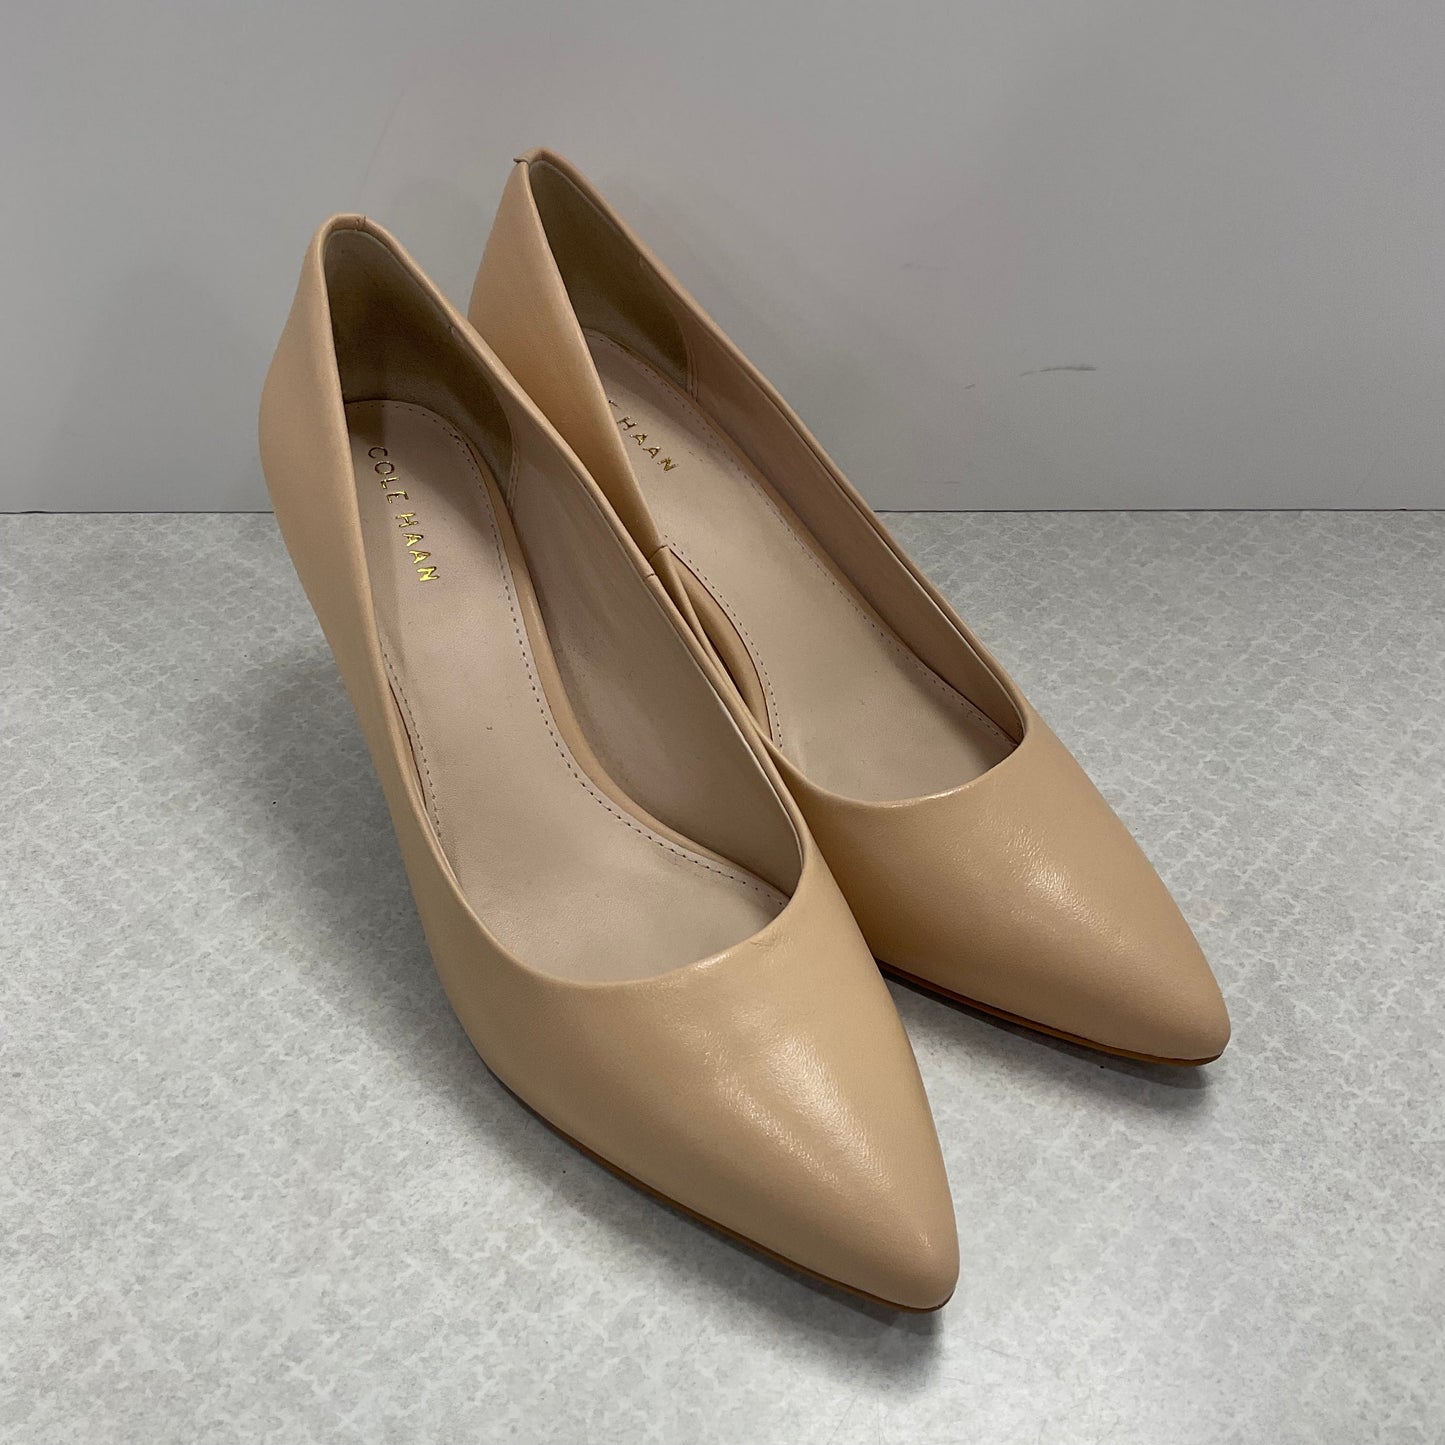 Shoes Heels Stiletto By Cole-haan  Size: 7